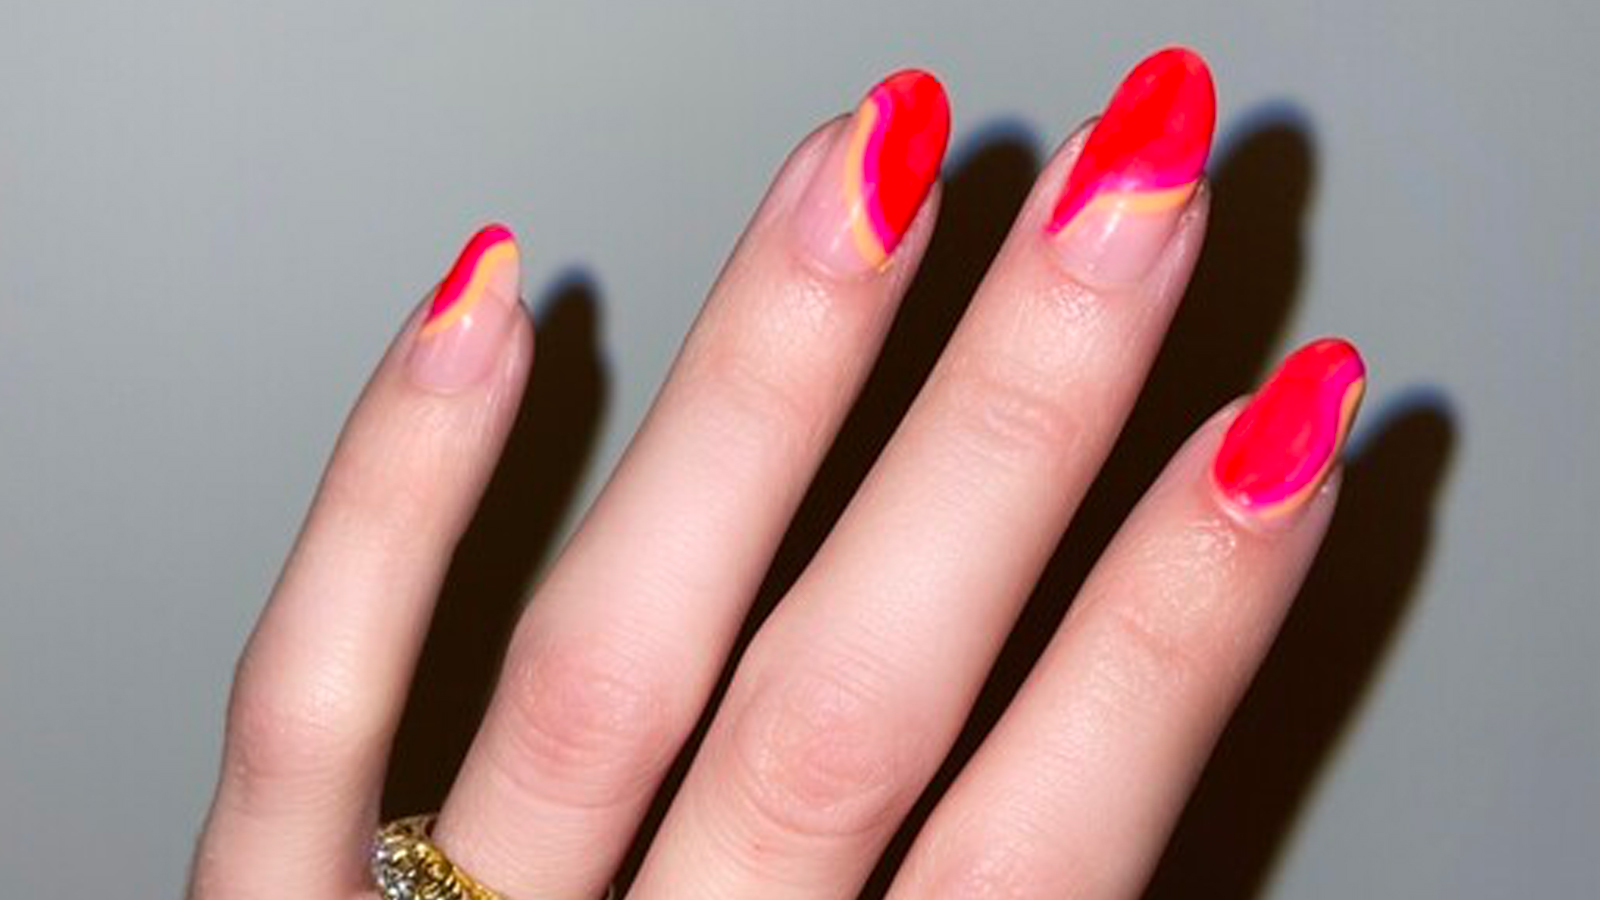 10. Net Nail Art Tutorial with Ombre Effect - wide 4